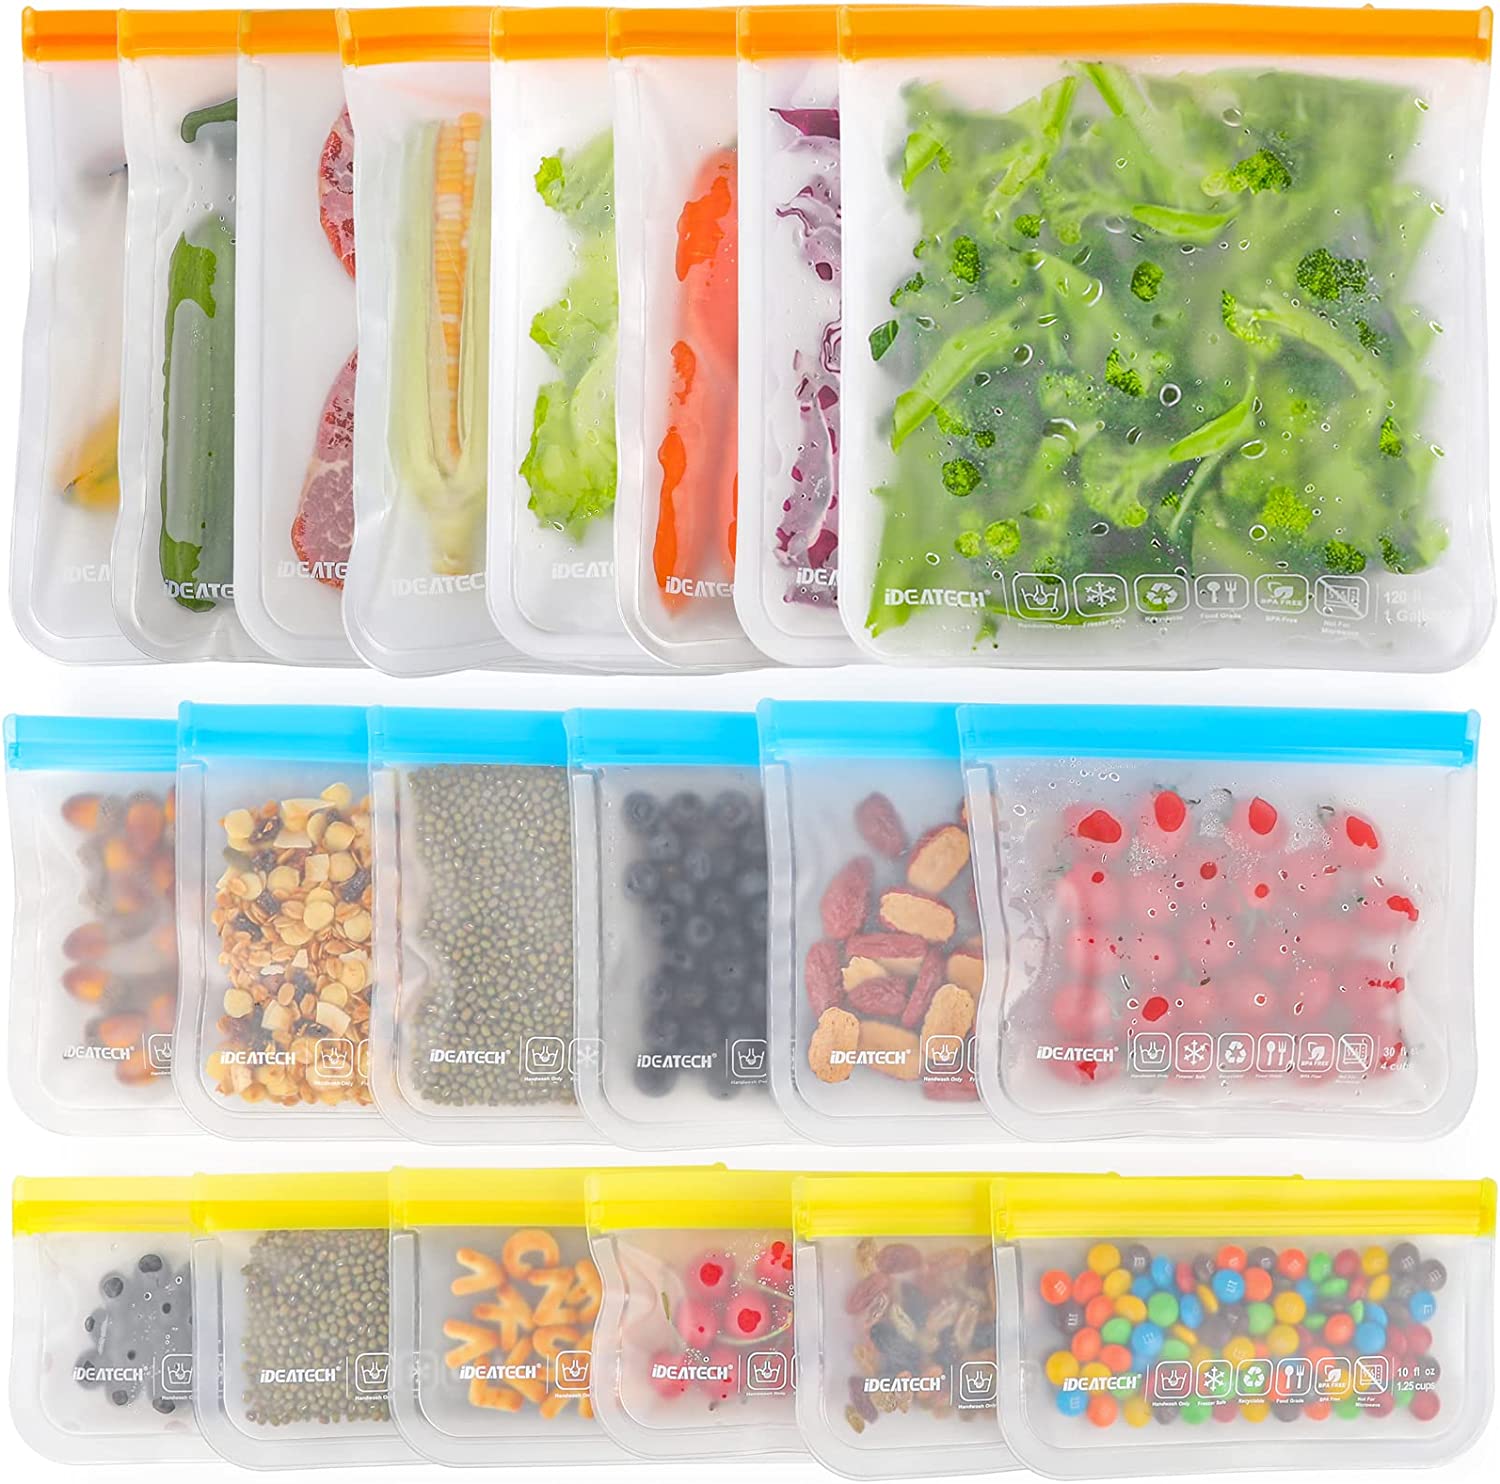 https://www.dontwasteyourmoney.com/wp-content/uploads/2021/04/ideatech-bpa-free-reusable-silicone-food-storage-bags-20-pack-1.jpg